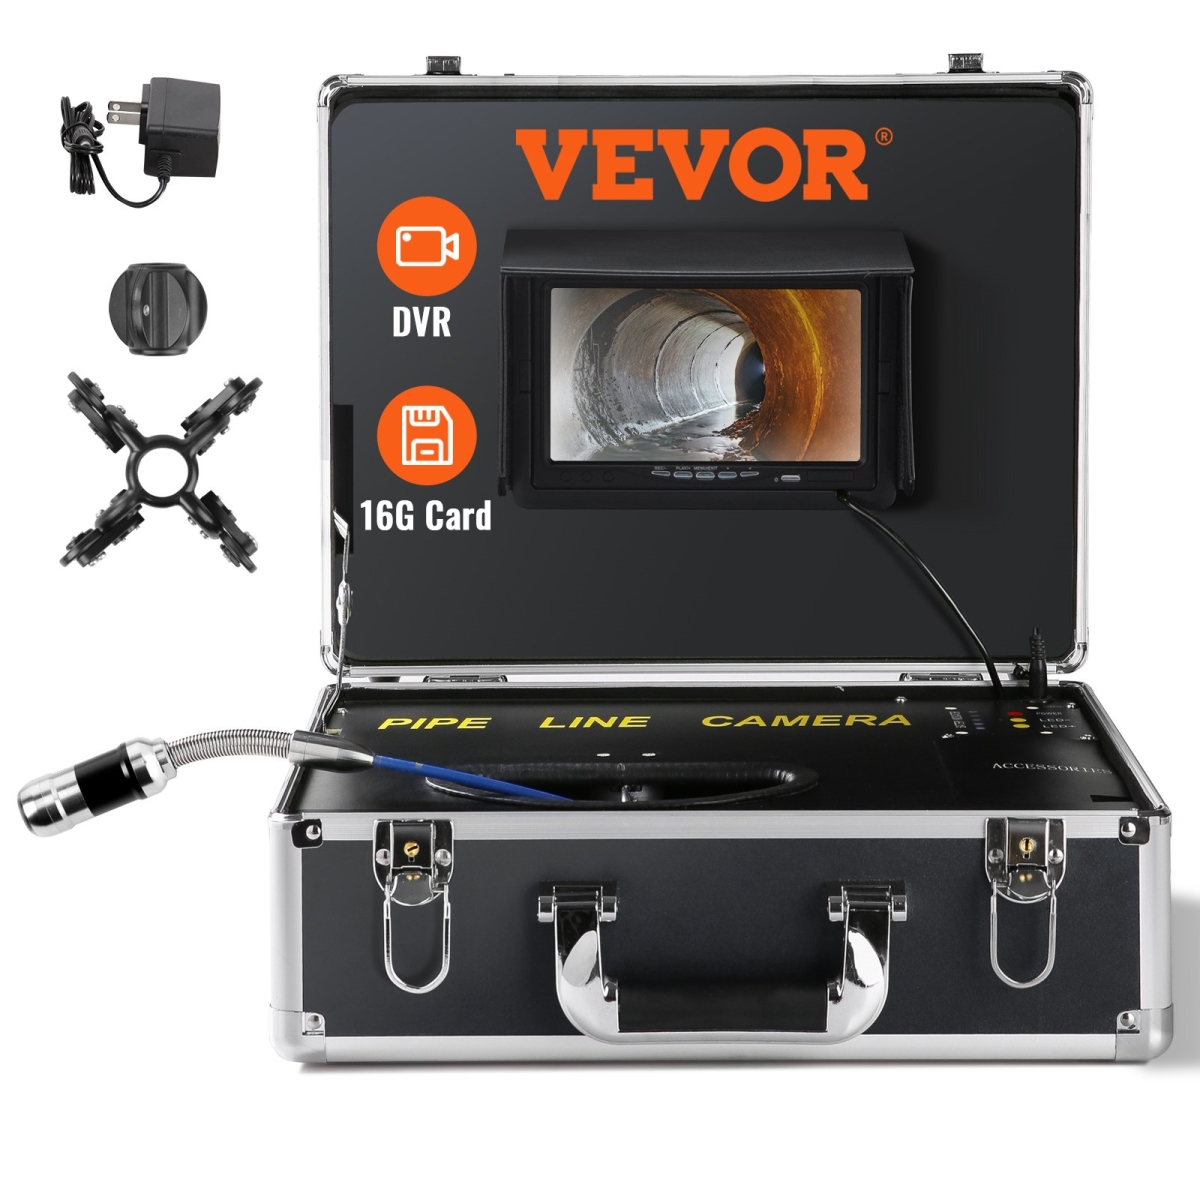 Picture of Vevor LXKXSGDNKJ730RHL1V1 Sewer Camera&#44; 100 ft. & 30 m&#44; 7 in. Screen Pipeline Inspection Camera with DVR Function&#44; Waterproof IP68 Camera&#44; 12 Piece